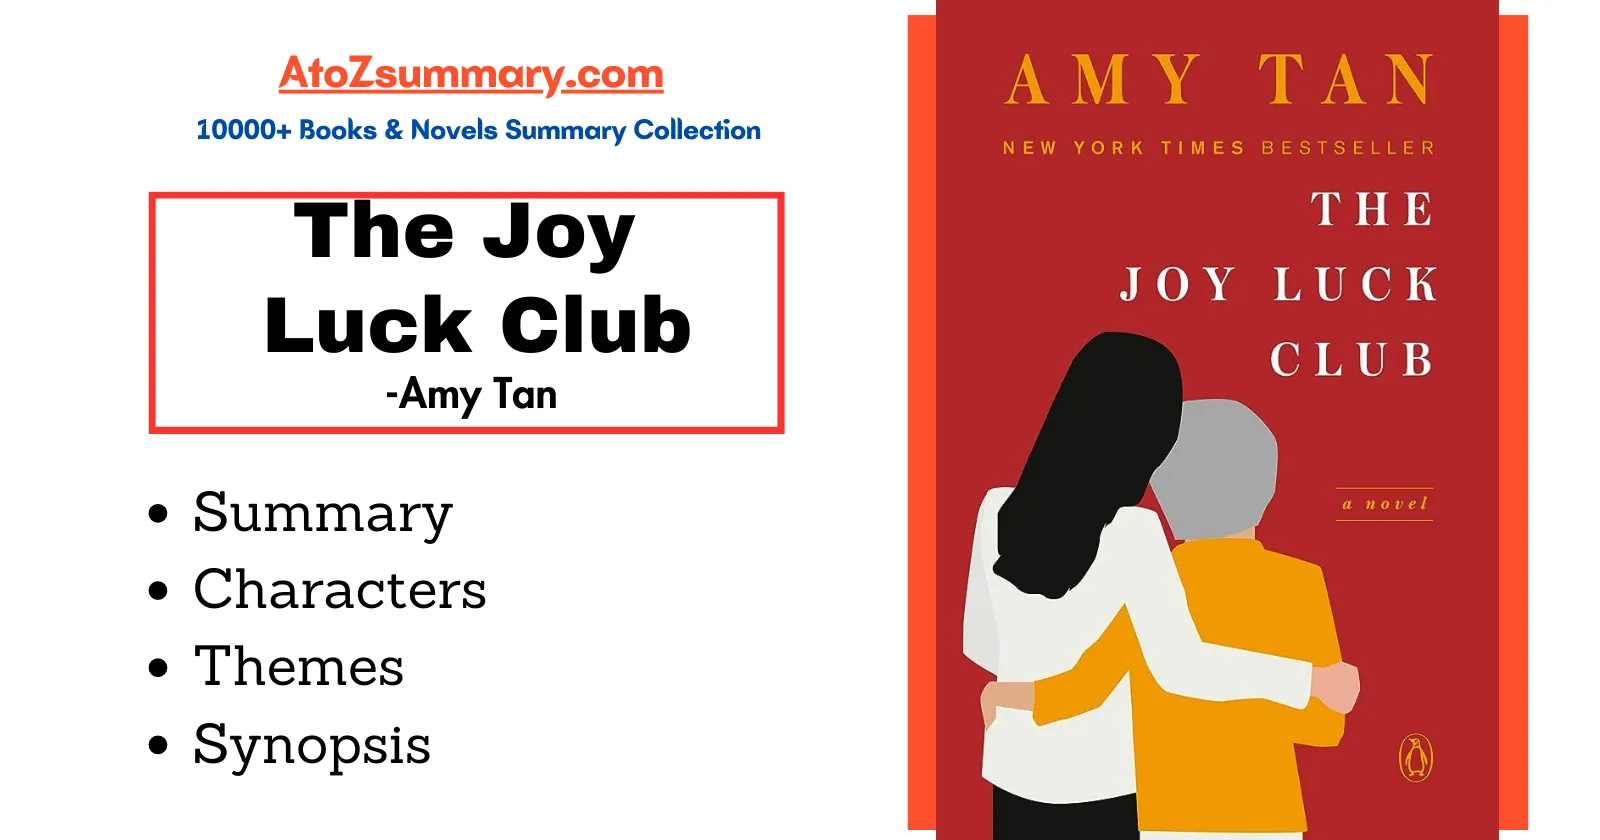 The Joy Luck Club Summary, Themes, Characters & Synopsis by Amy Tan